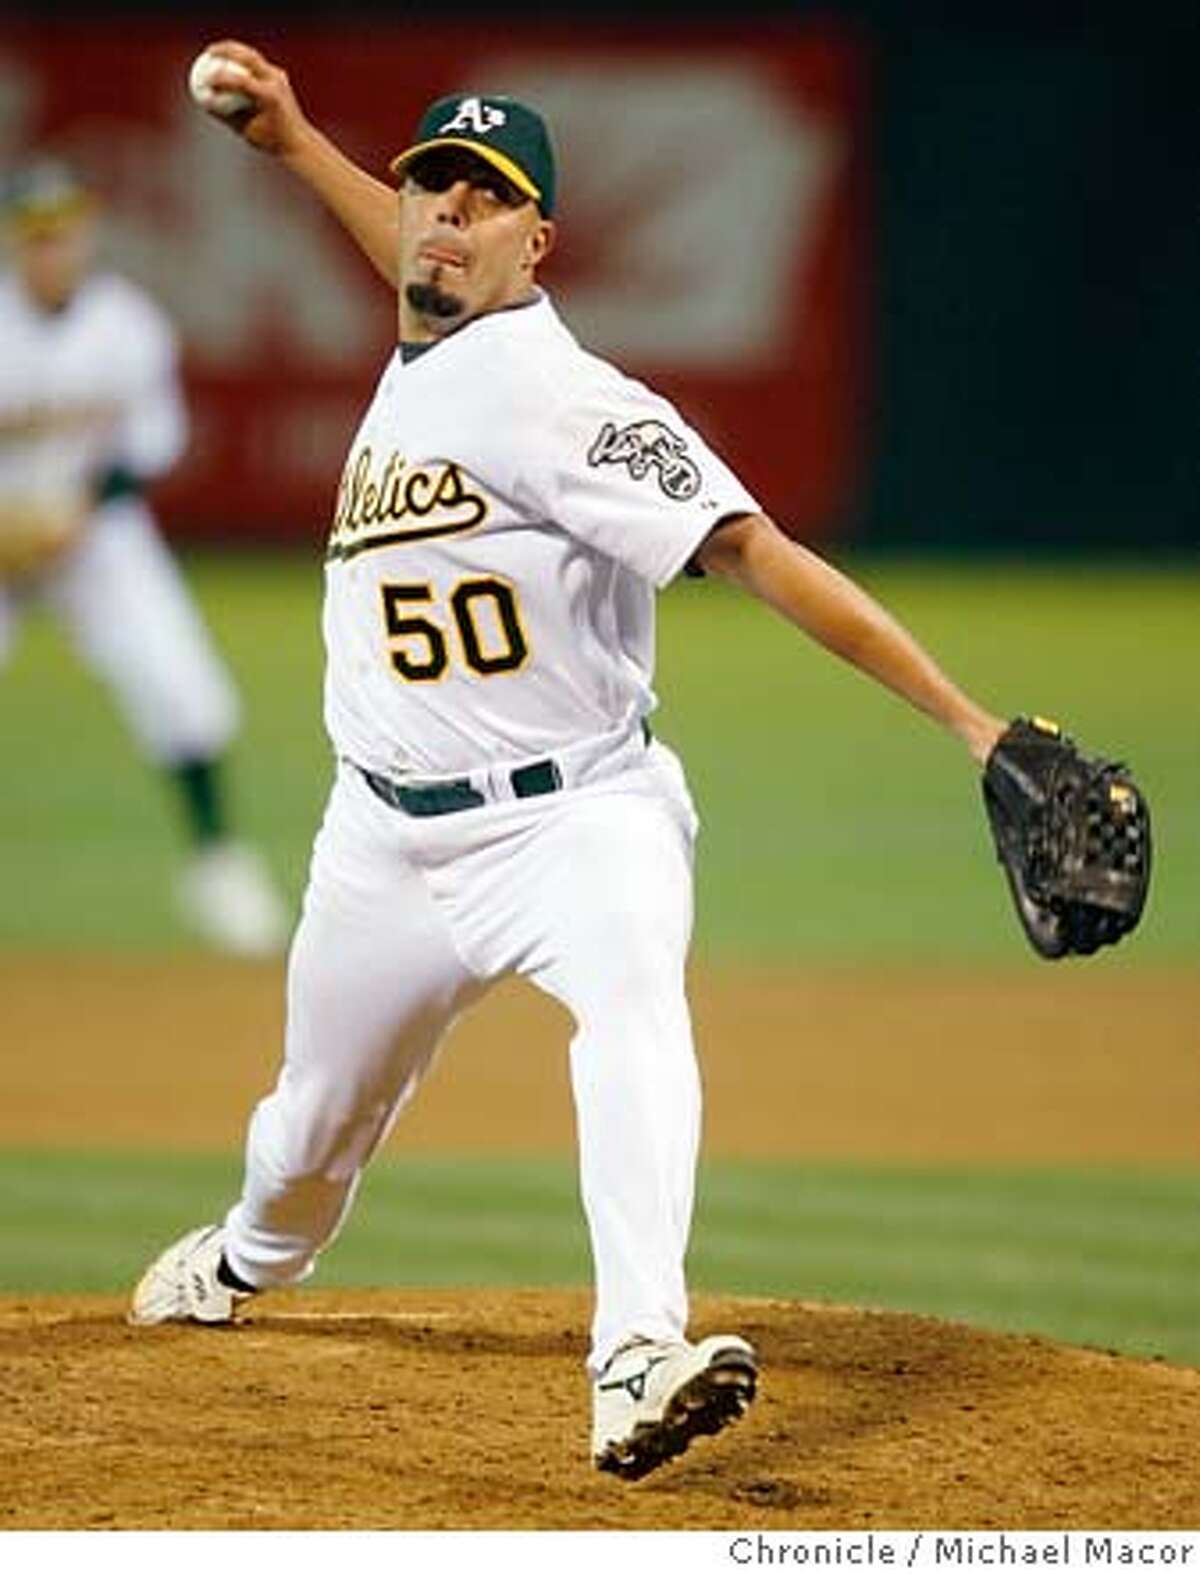 athletics_406_mac.jpg A's pitcher -Kiko Calero closes out the 9th inning. Oakland Athletics vs. Seattle Mariners Event in, Oakland, Ca, on 8/15/06. Photo by: Michael Macor / San Francisco Chronicle Mandatory credit for Photographer and San Francisco Chronicle No sales/ Magazines Out